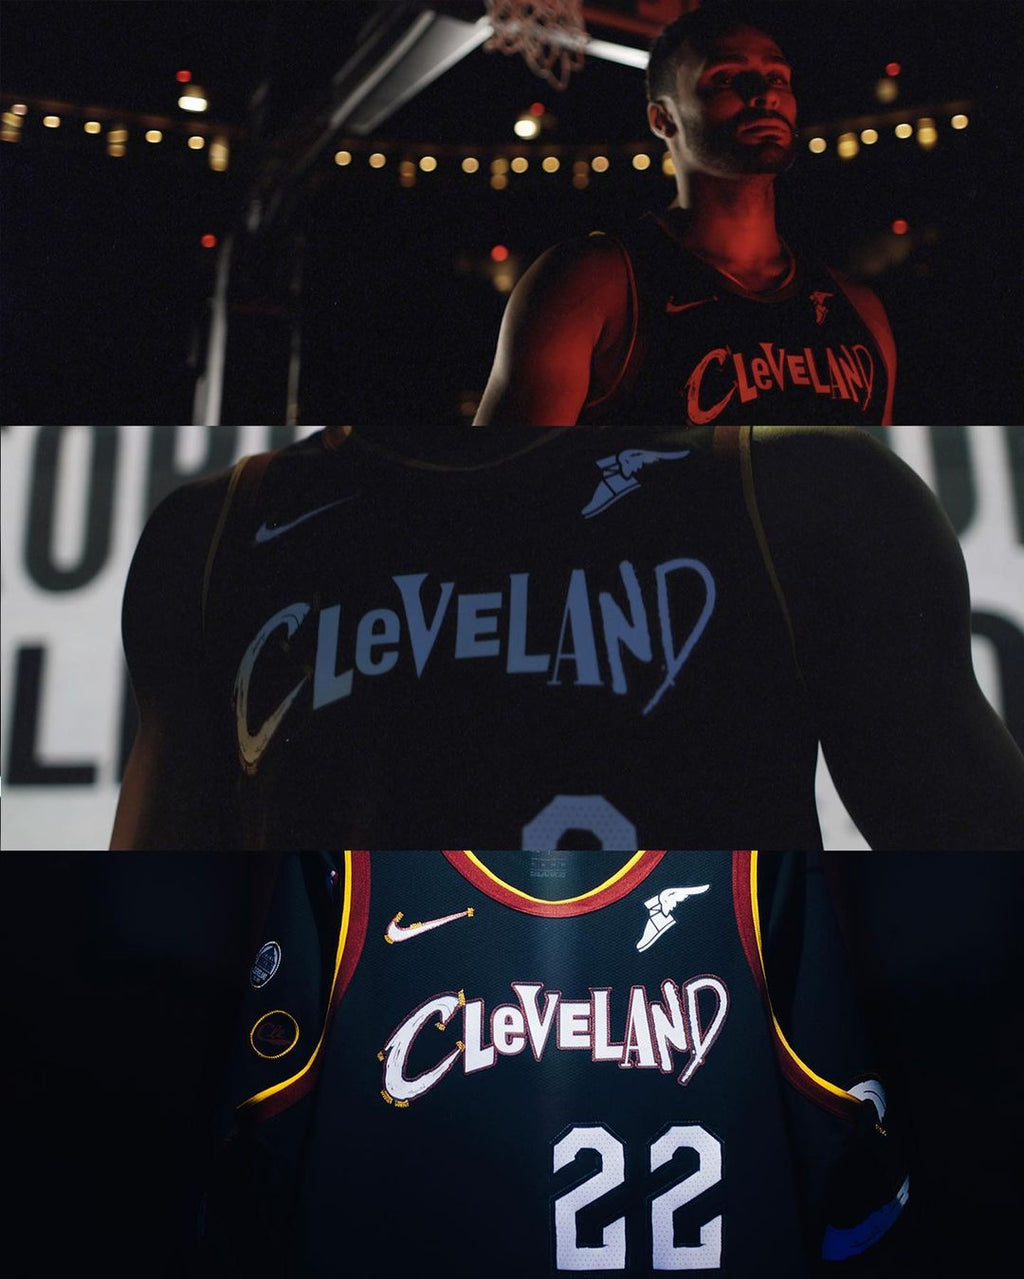 Cavs City Edition Jersey Pays Homage To Rock & Roll Hall of Fame – I'm  From Cleveland